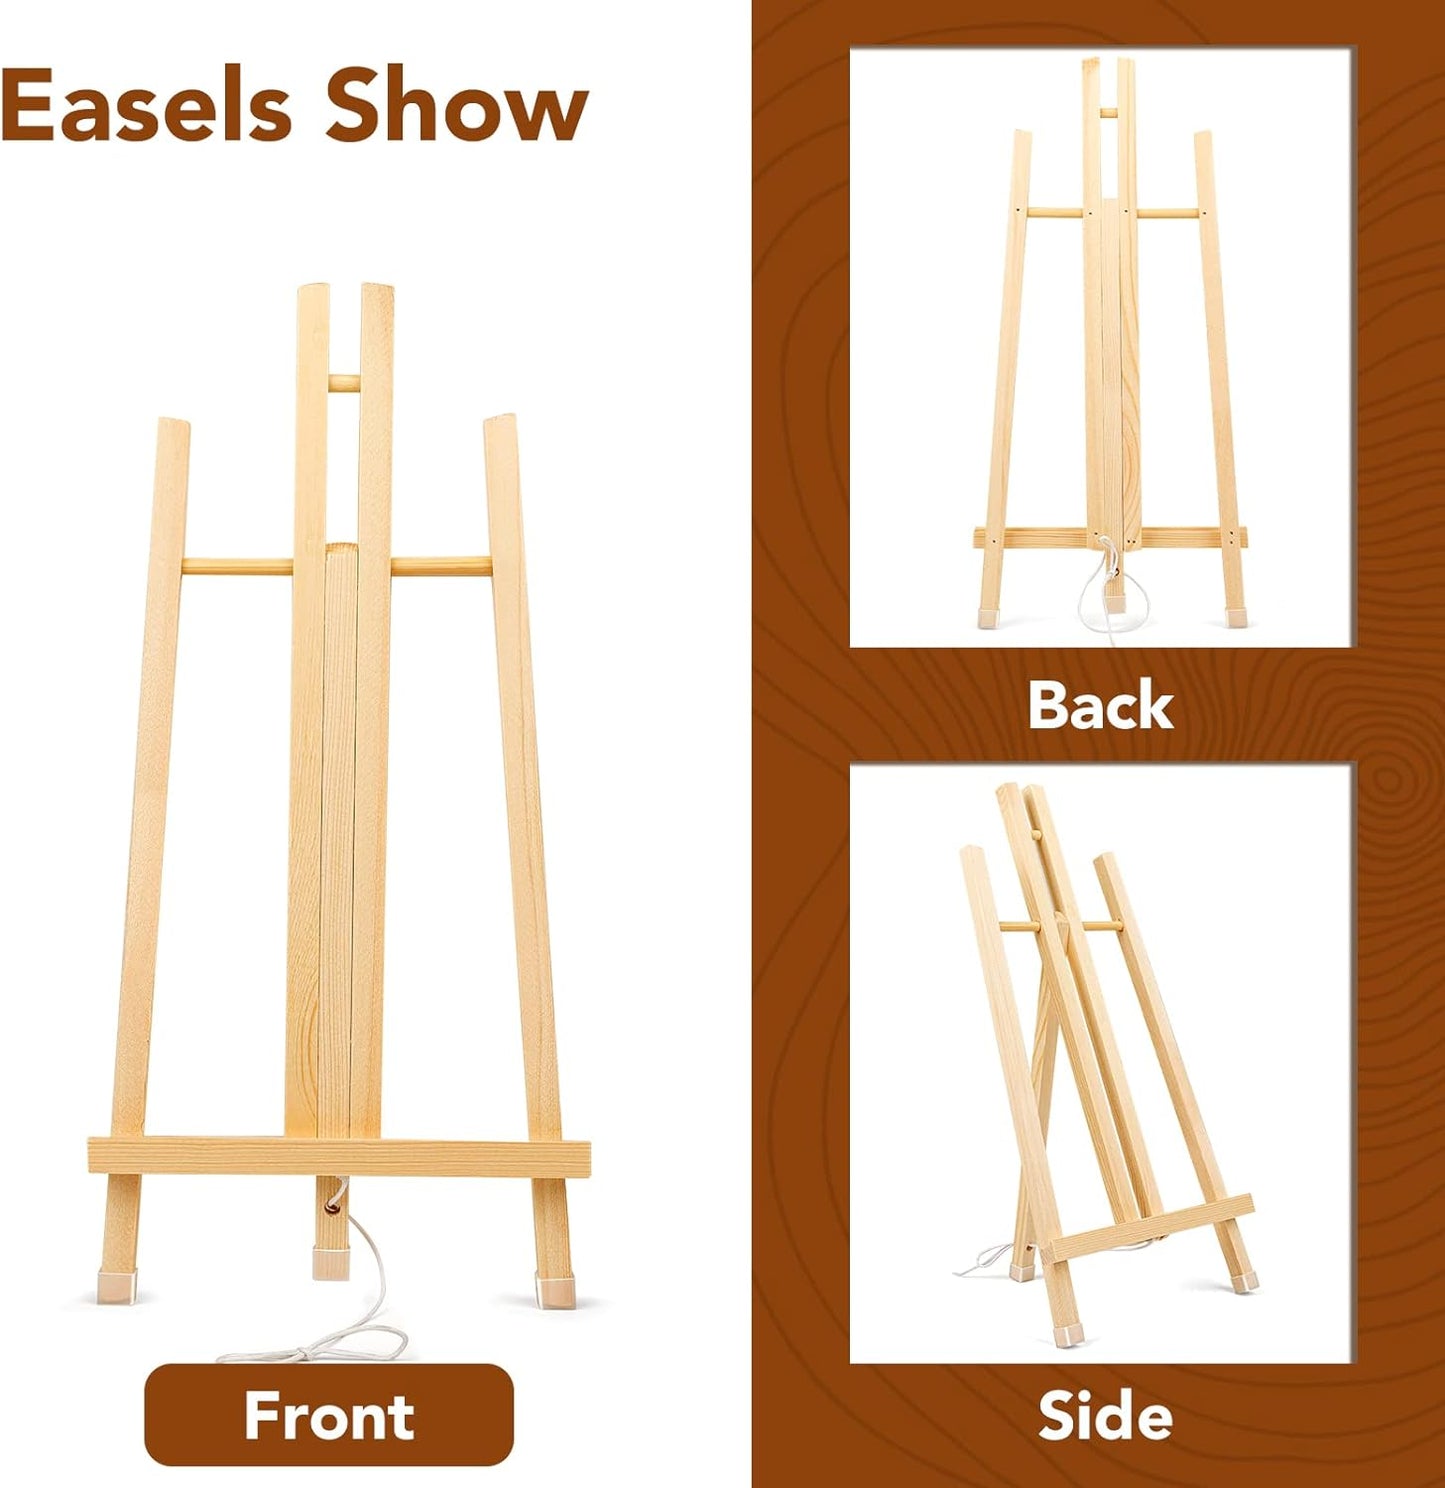 3 Pack 16 Inch Wood Easels, Easel Stand for Painting Canvases, Art, and Crafts, Tripod, Painting Party Easel, Kids Student Tabletop Easels for Painting, Portable Canvas Photo Picture Sign Holder